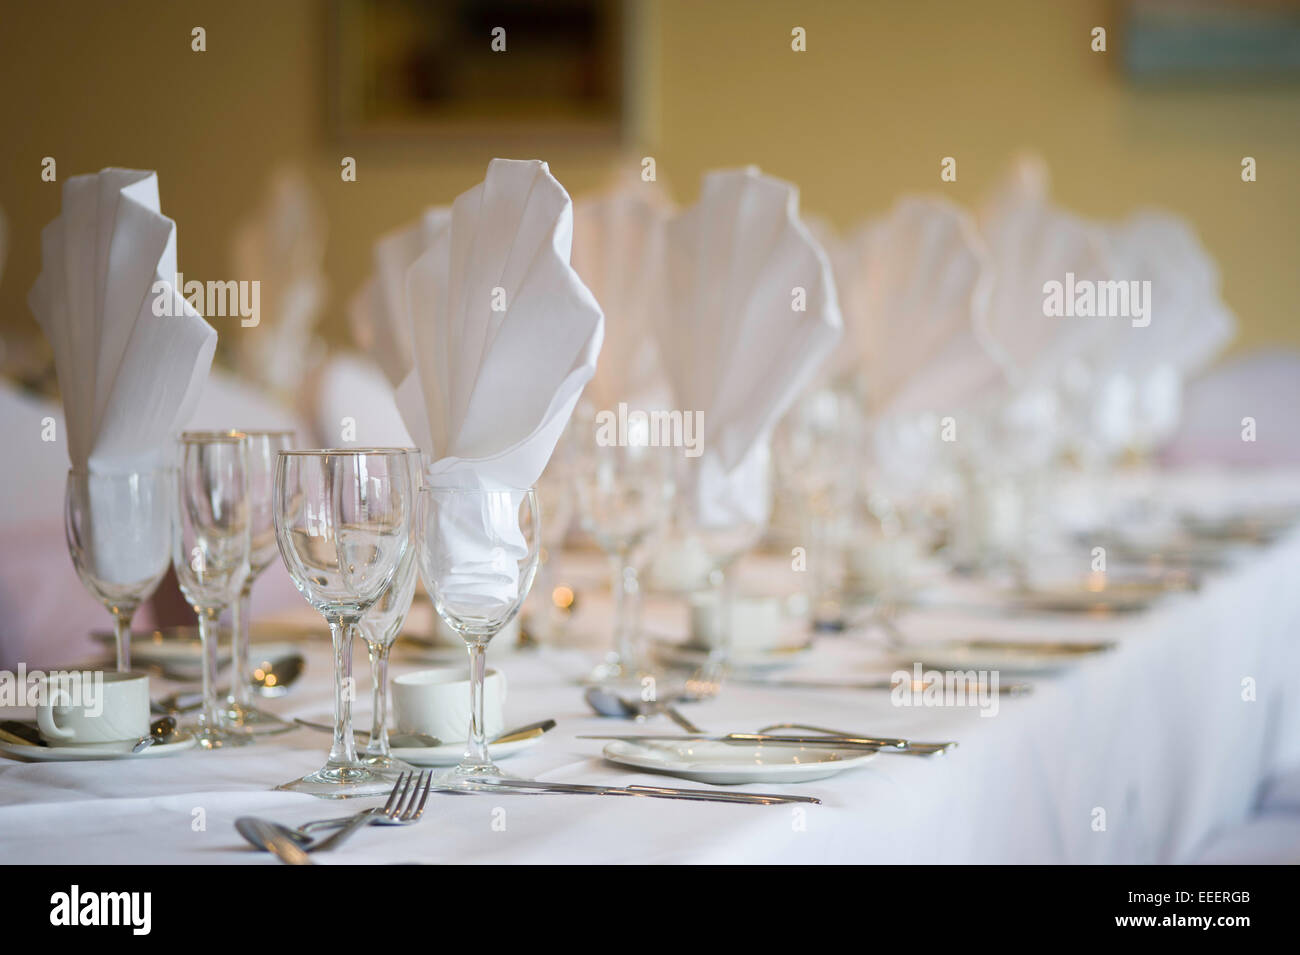 a wedding banquet table with wine glasses fully dressed Stock Photo